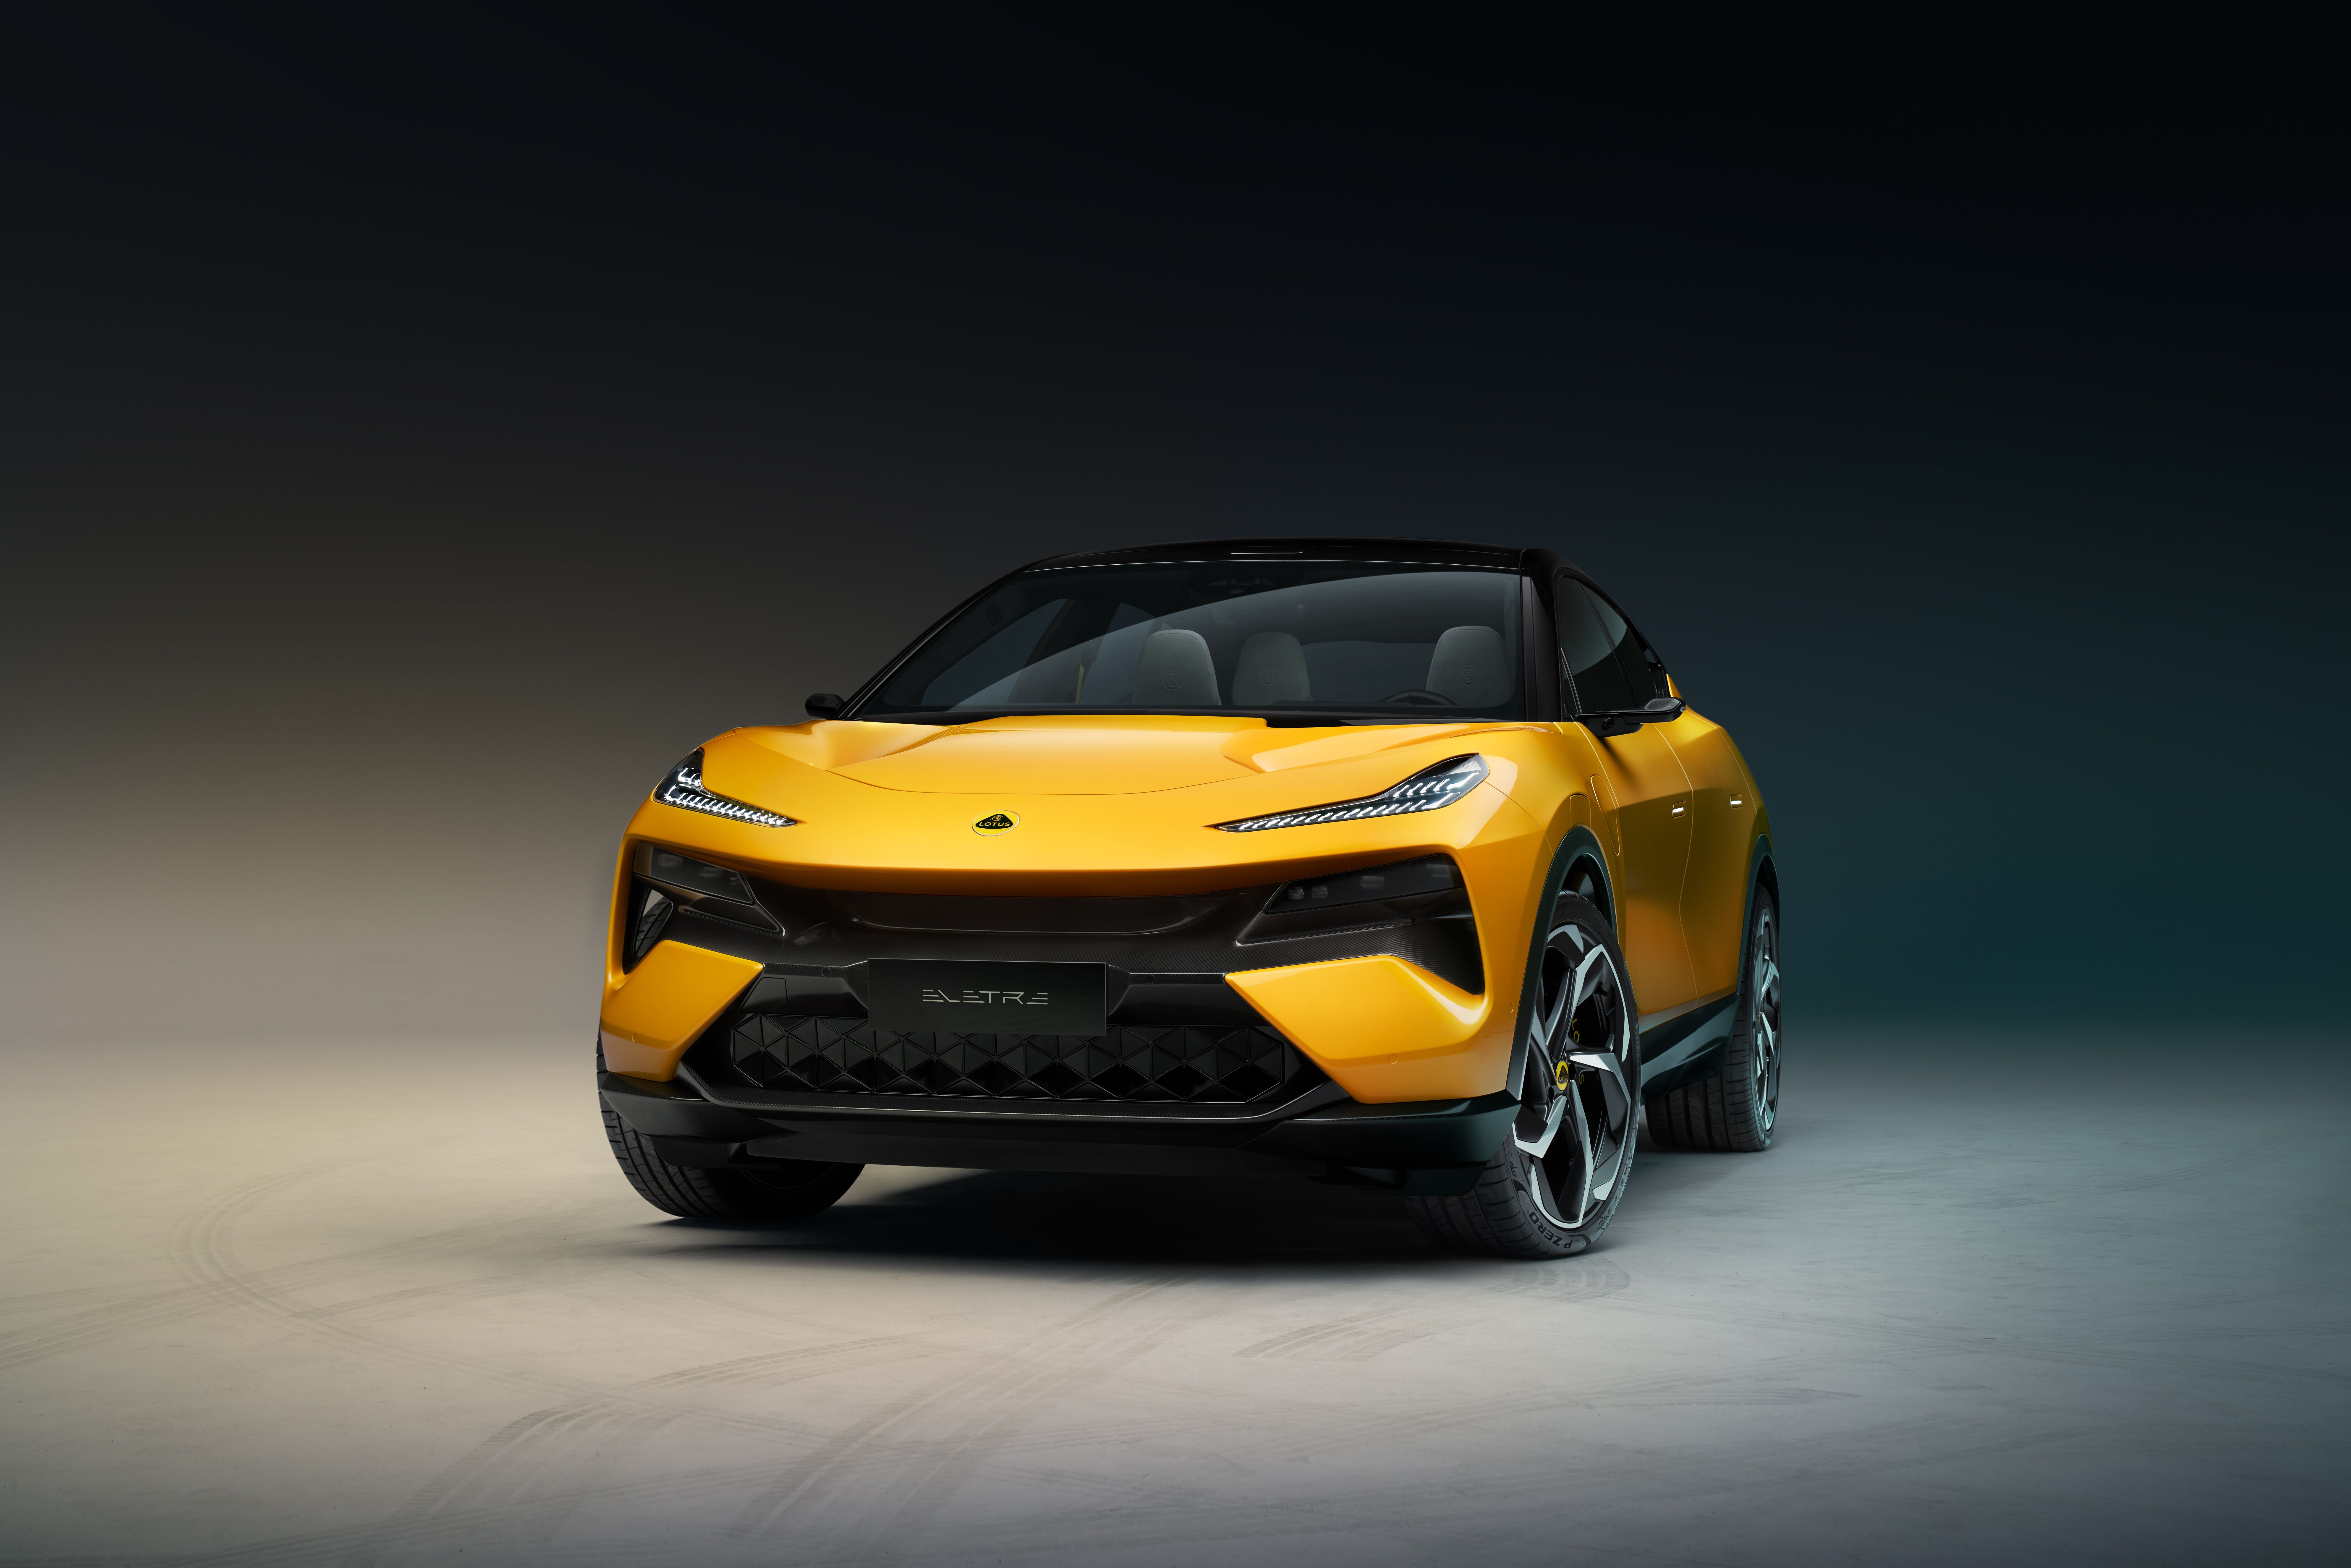 Lotus' Electric Eletre SUV Is a Radical Departure